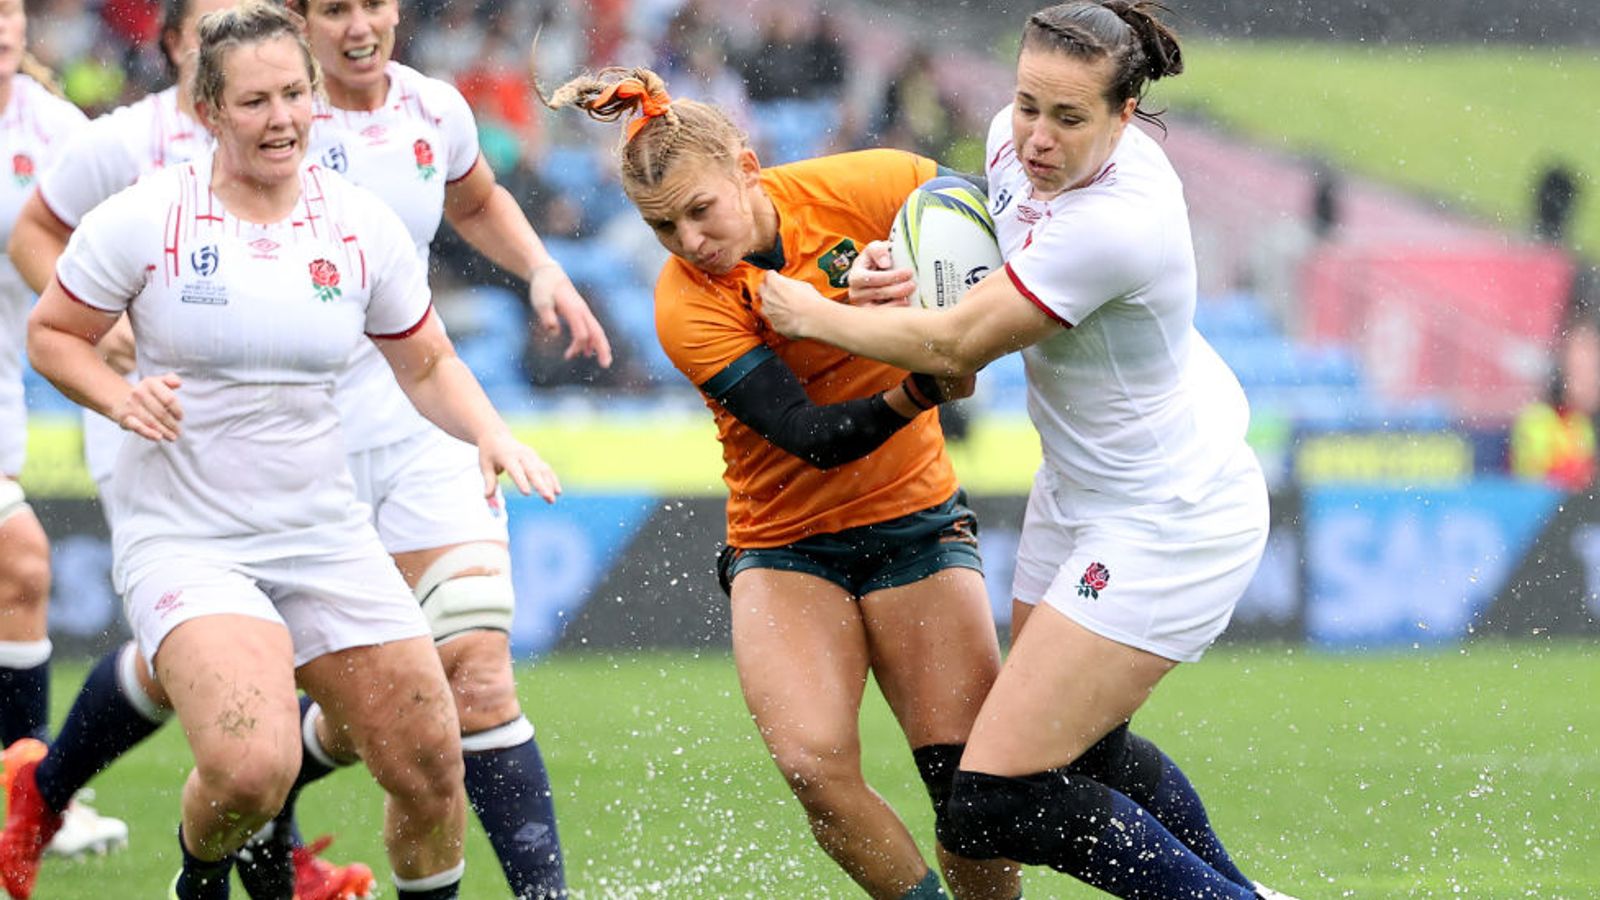 Rugby World Cup: England show variety in awful conditions to reach semis, plus Marlie Packer’s main motivation | Rugby Union News